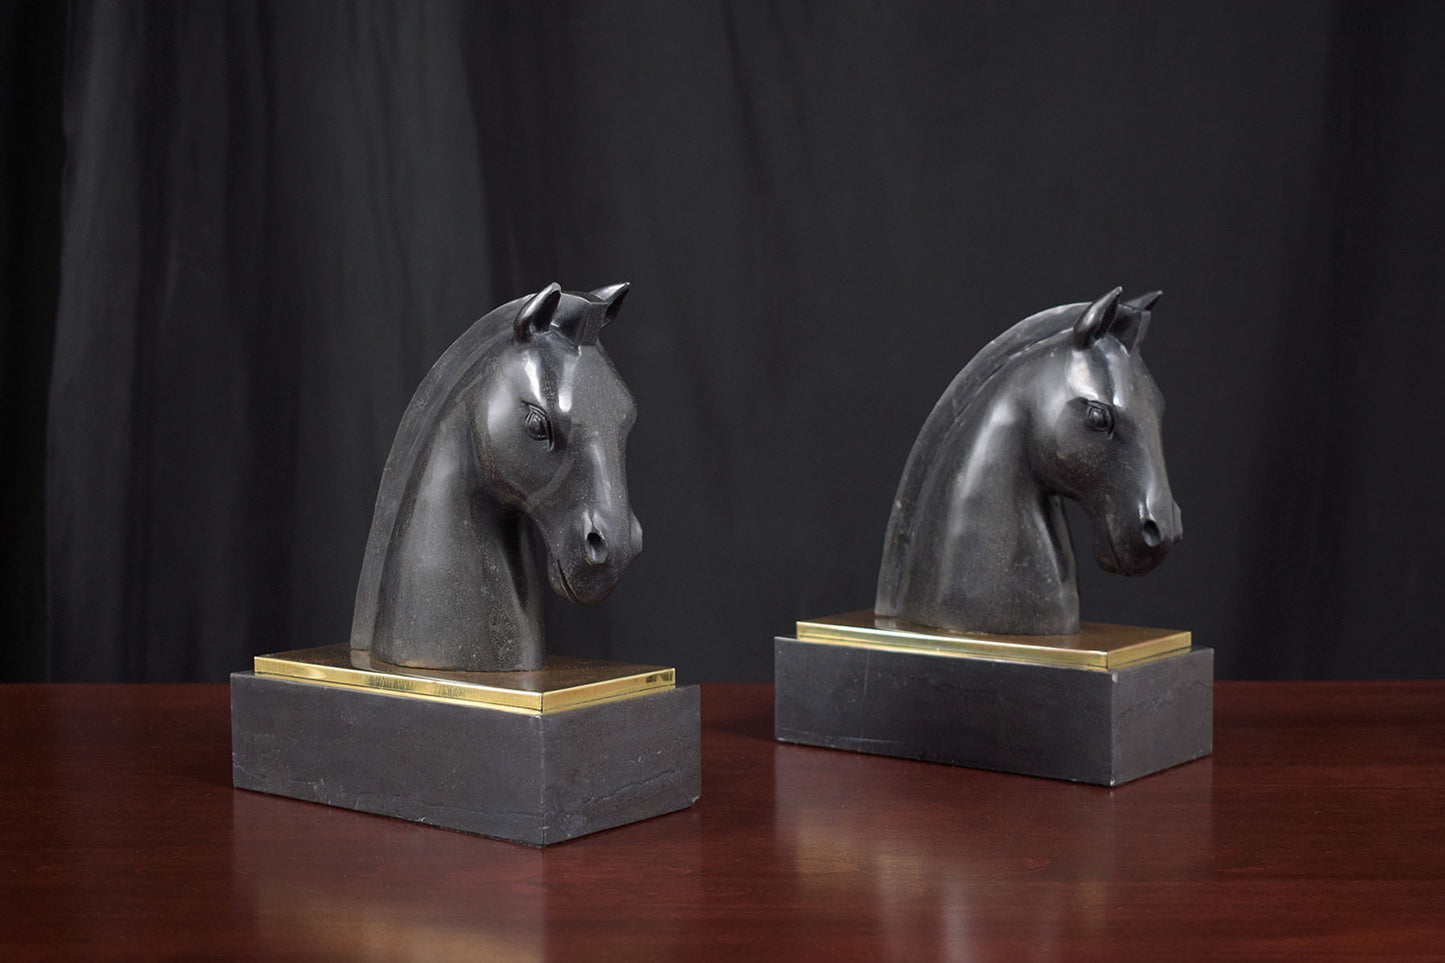 Vintage Black Marble Horse Head Bookends